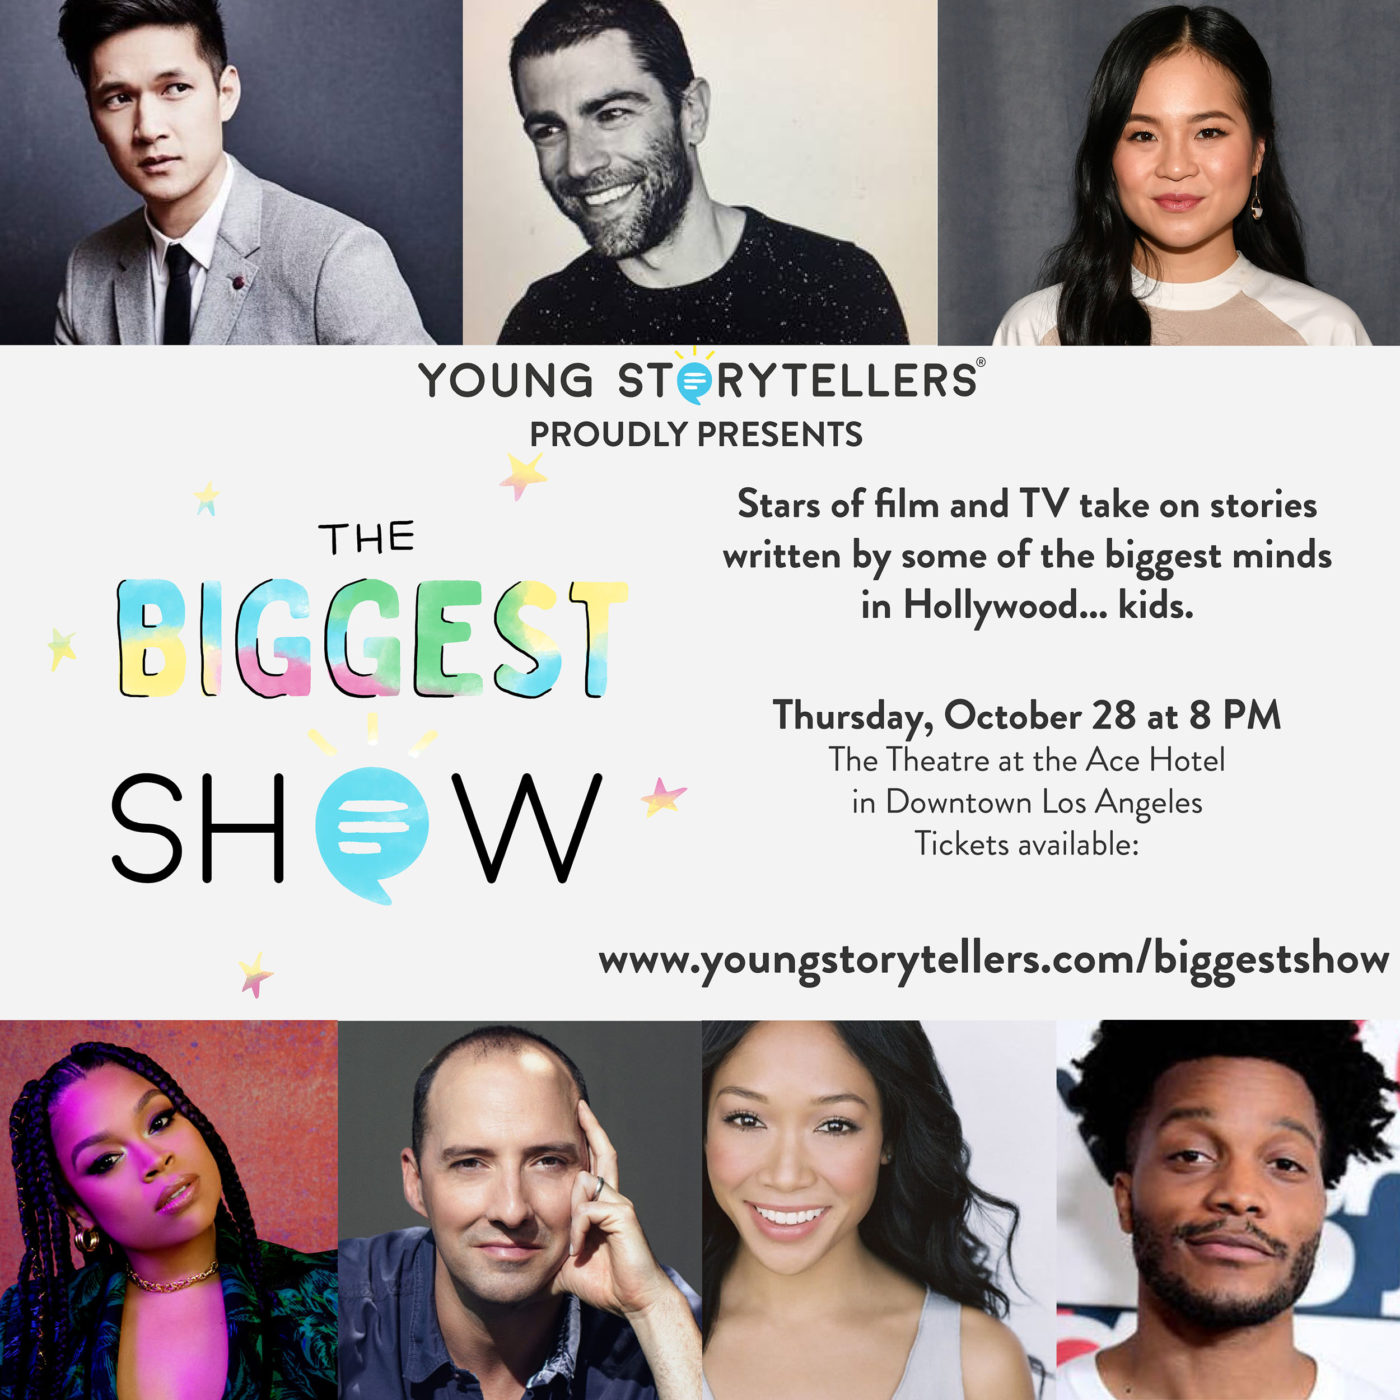 Young Storytellers Presents the Biggest Show Thursday October 28 at 8pm